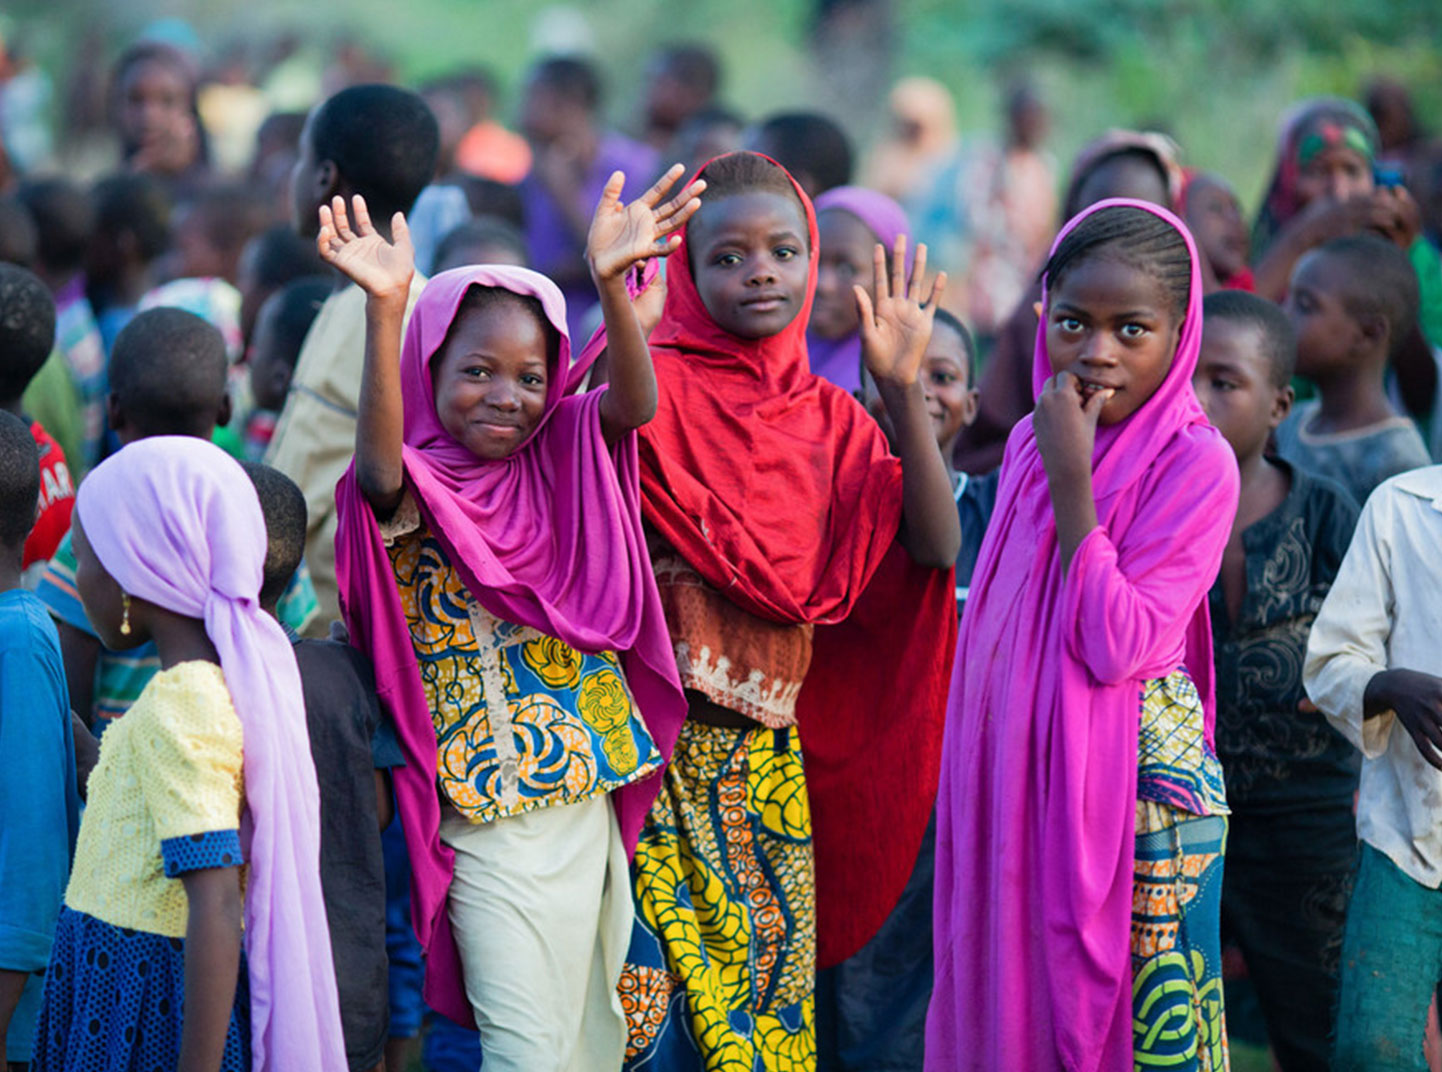 A group of children gather in the Sahel region in Niger. Three of them are smiling and waving at the camera.